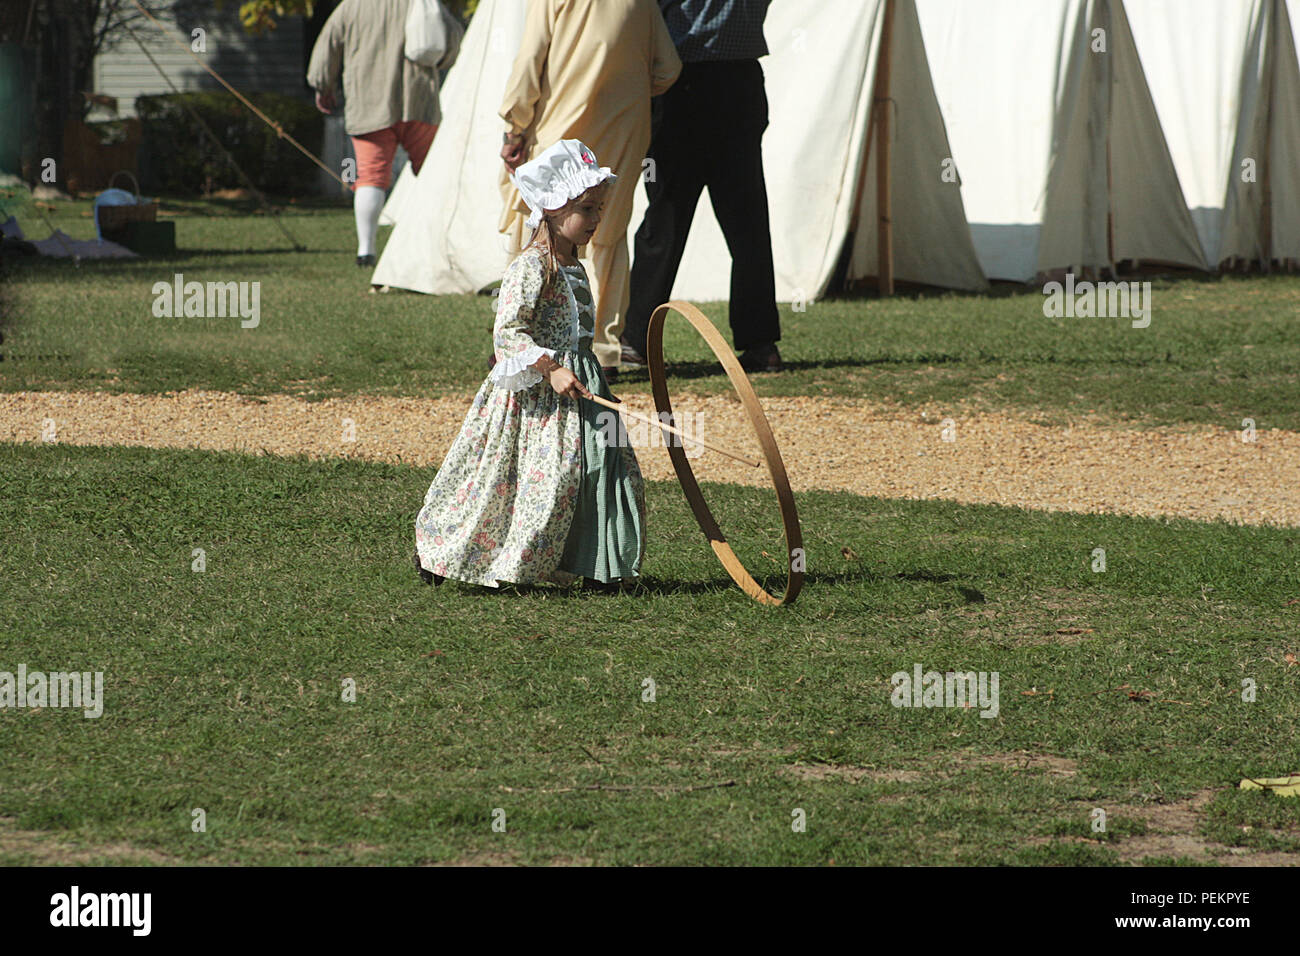 Little child playing hoop and stick in Colonial Williamsburg, Virginia, USA Stock Photo